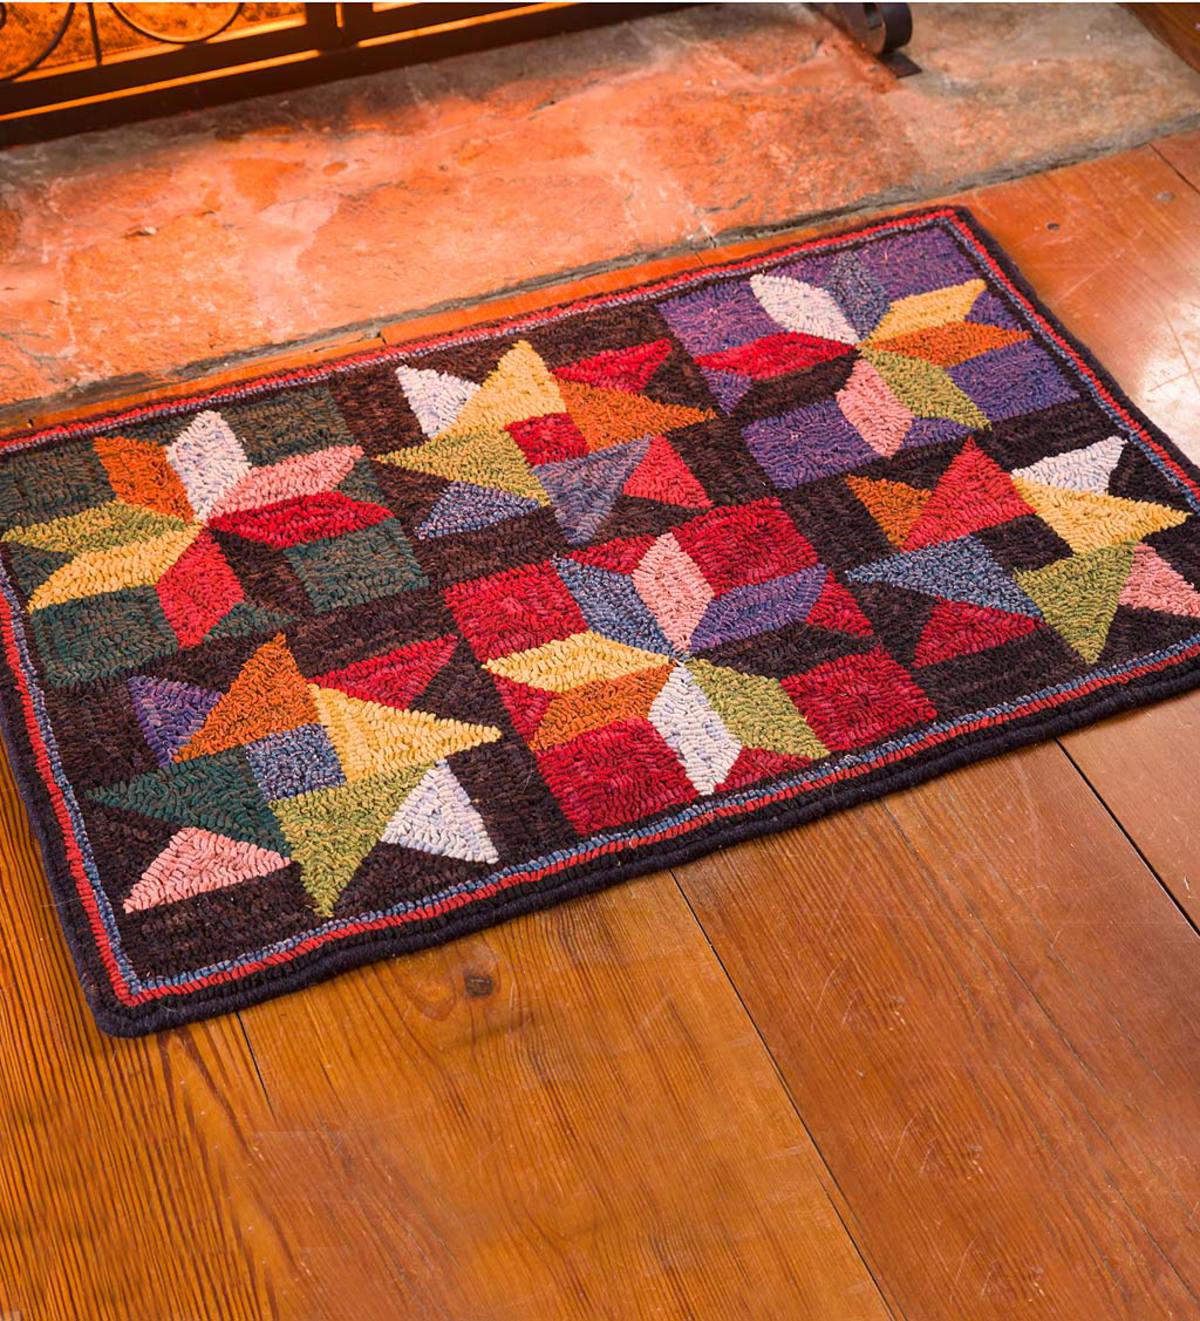 Handmade Patchwork Star Hooked Wool Rug Plow And Hearth